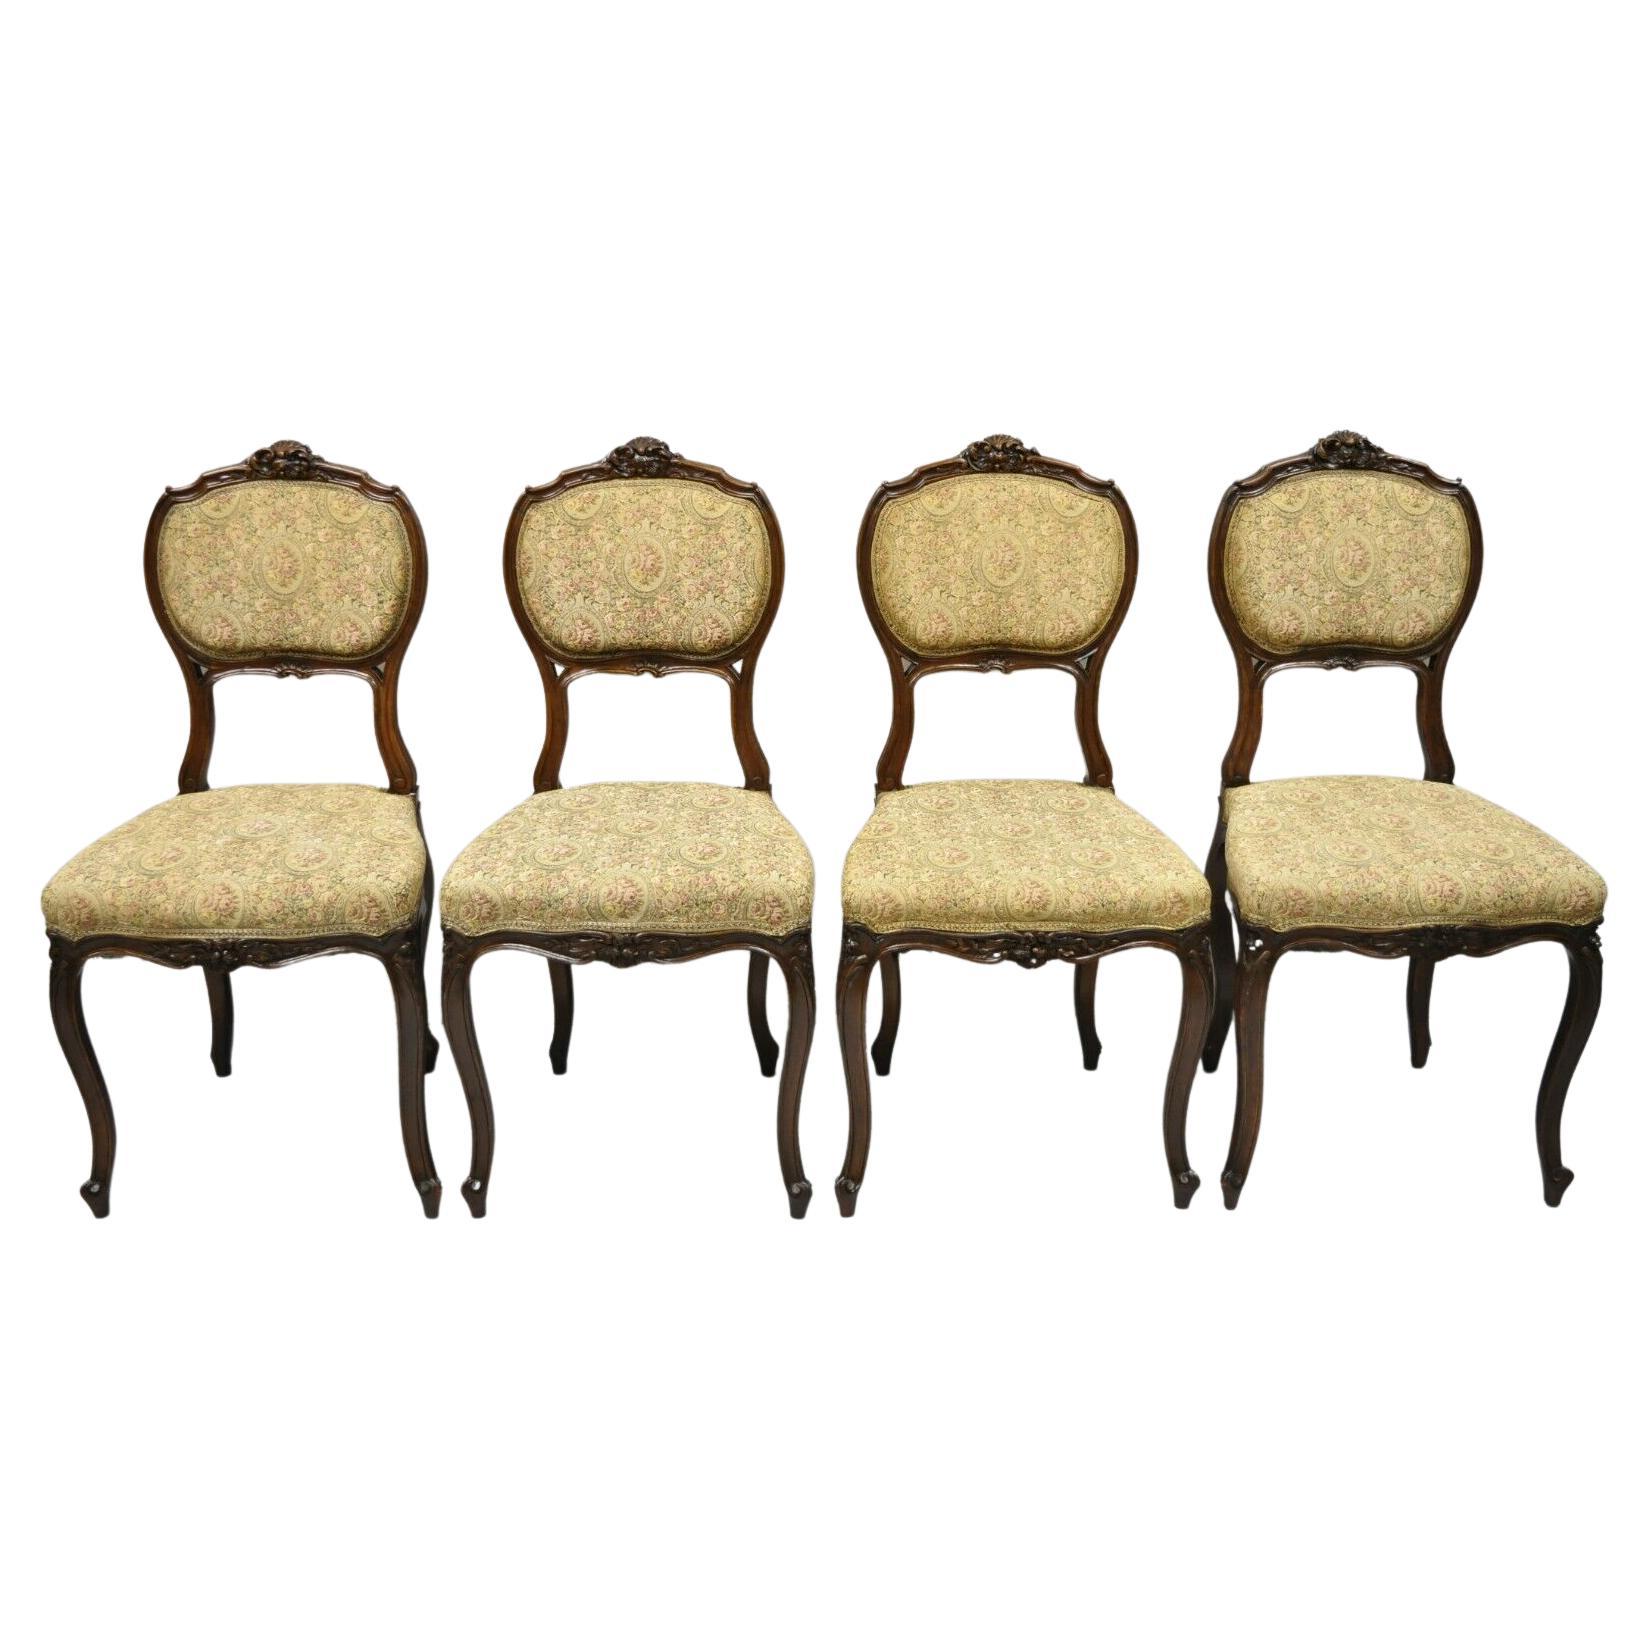 Antique French Victorian Mahogany Upholstered Parlor Side Chairs, Set of 4 For Sale